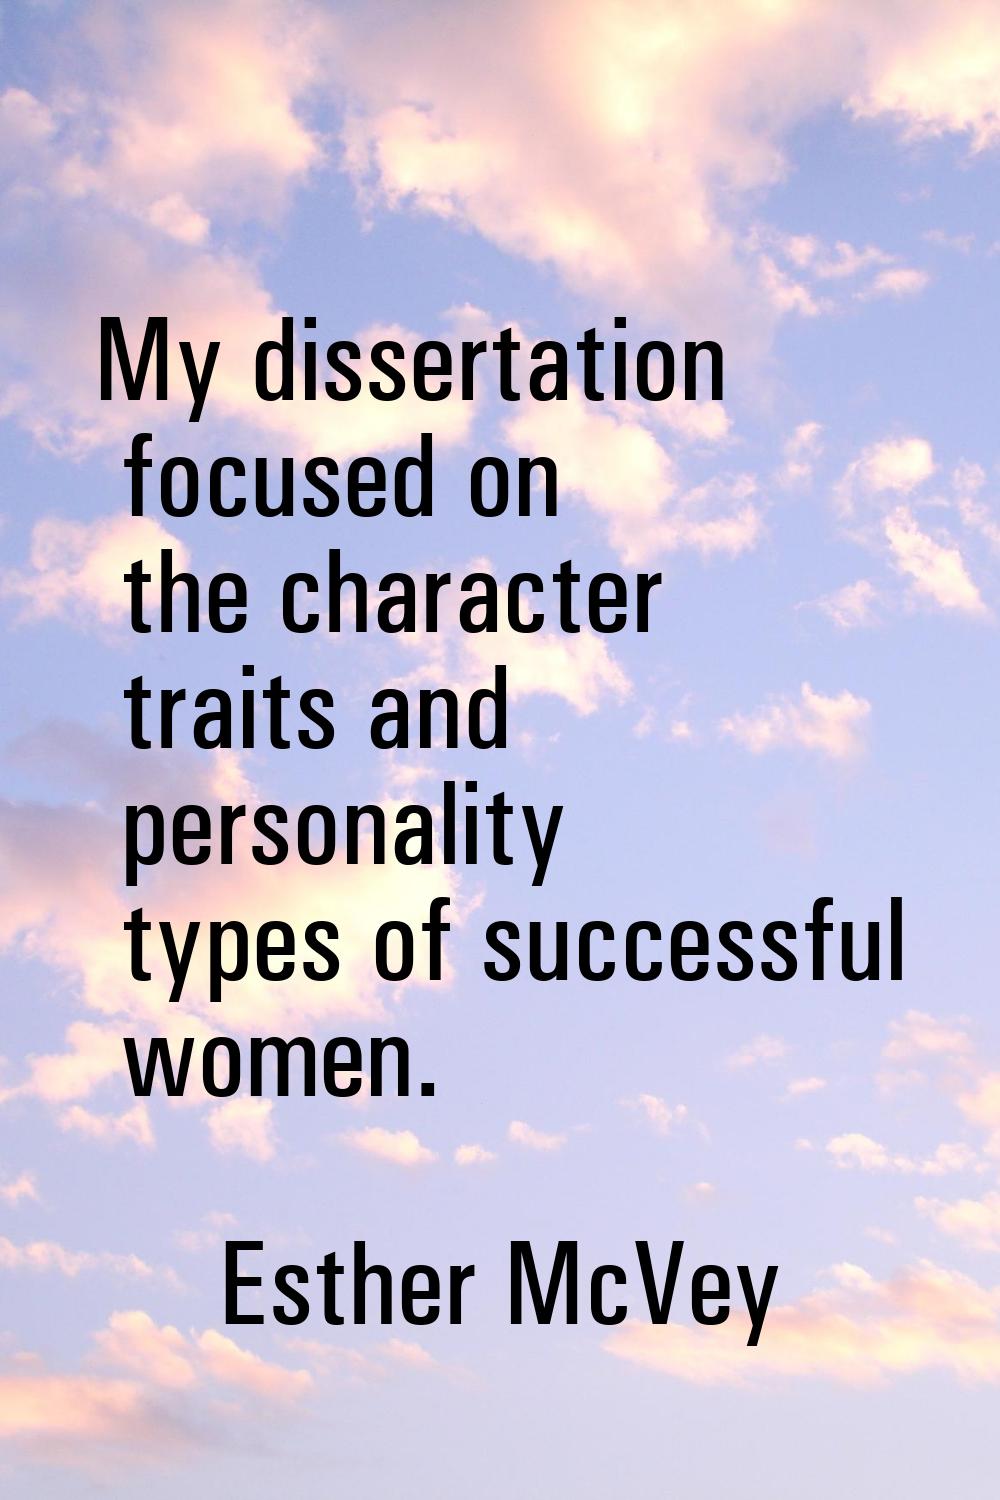 My dissertation focused on the character traits and personality types of successful women.